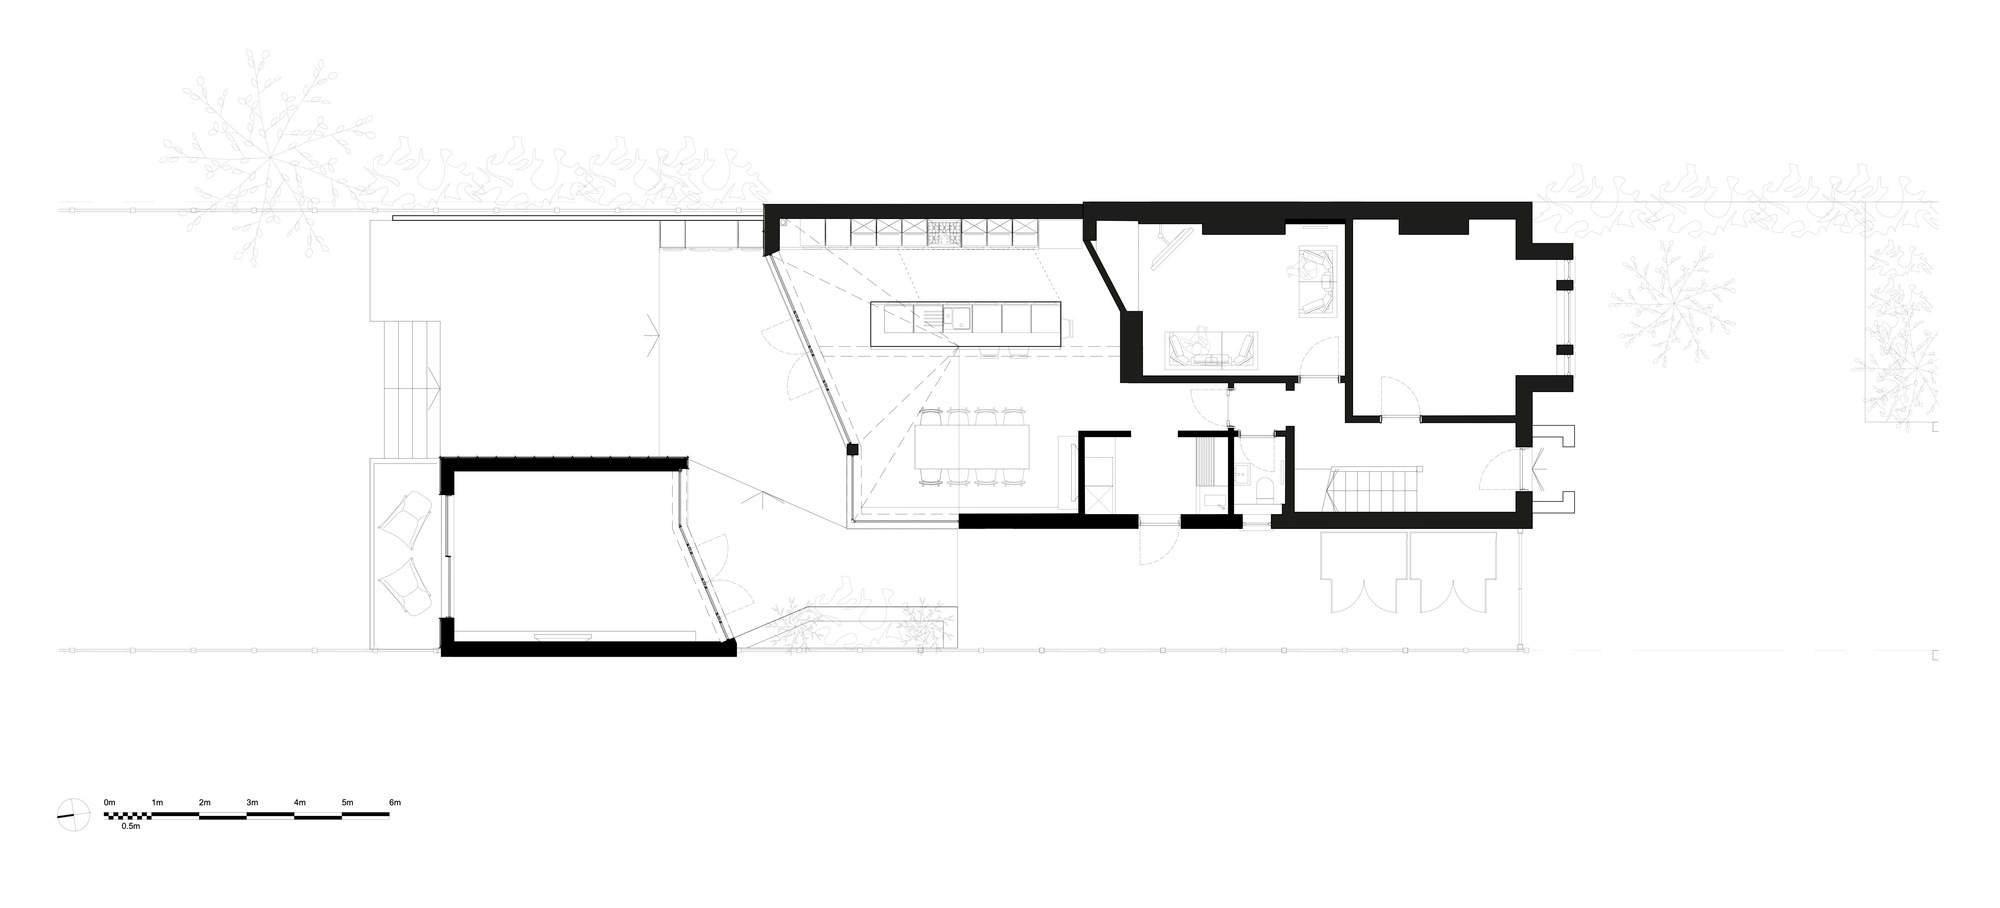 Ground-floor-plan-of-renovated-Victorian-family-house-in-London-40826